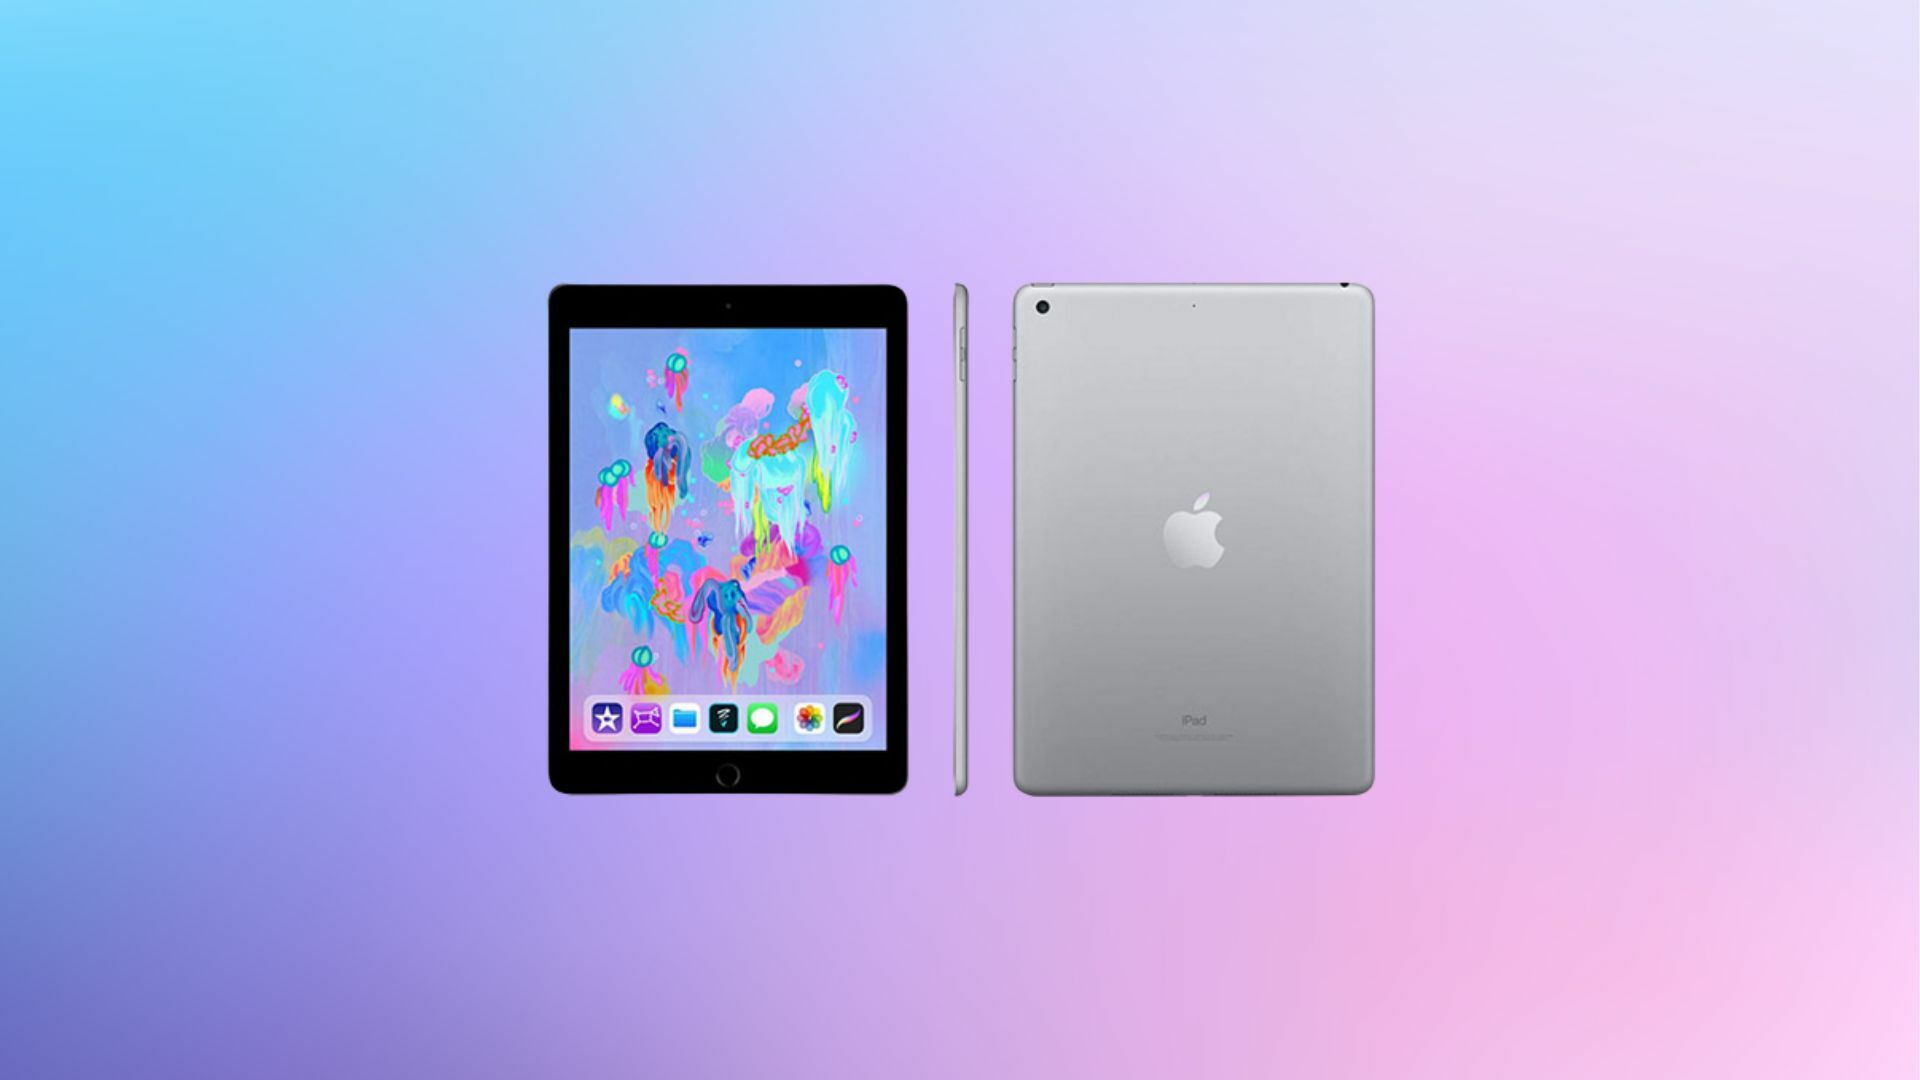 Refurbished 6th-Generation iPad and Accessories Bundle on a colorful background.